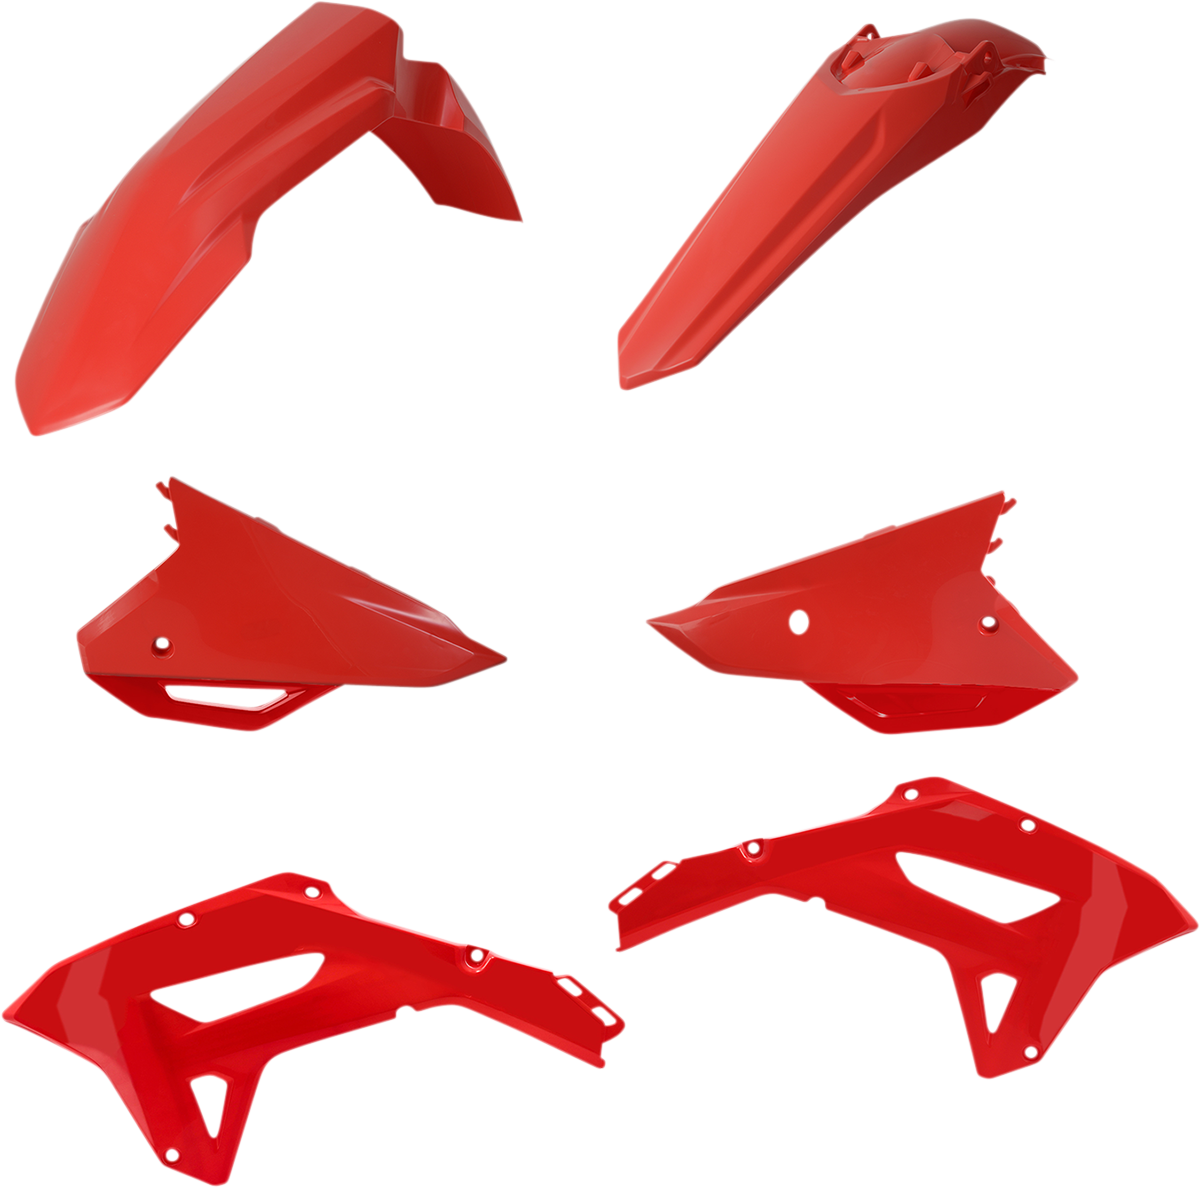 ACERBIS Standard Replacement Body Kit - Red 2861790227